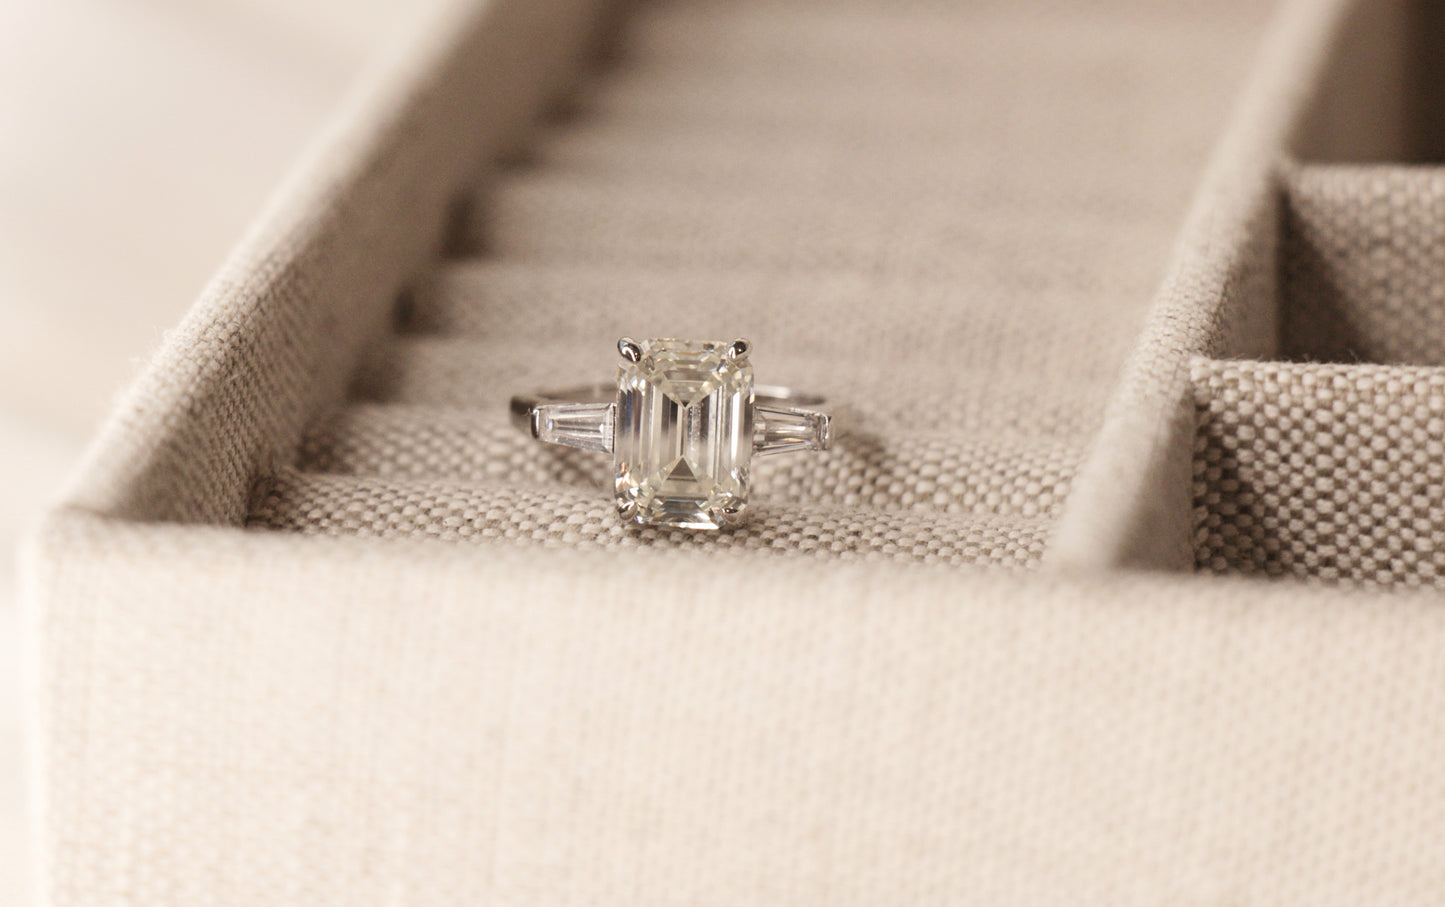 5 Carat Emerald Cut Engagement Ring with tapered baguettes on a 925 Sterling Silver band makes the perfect promise ring or proposal ring for her by margalit rings travel ring front